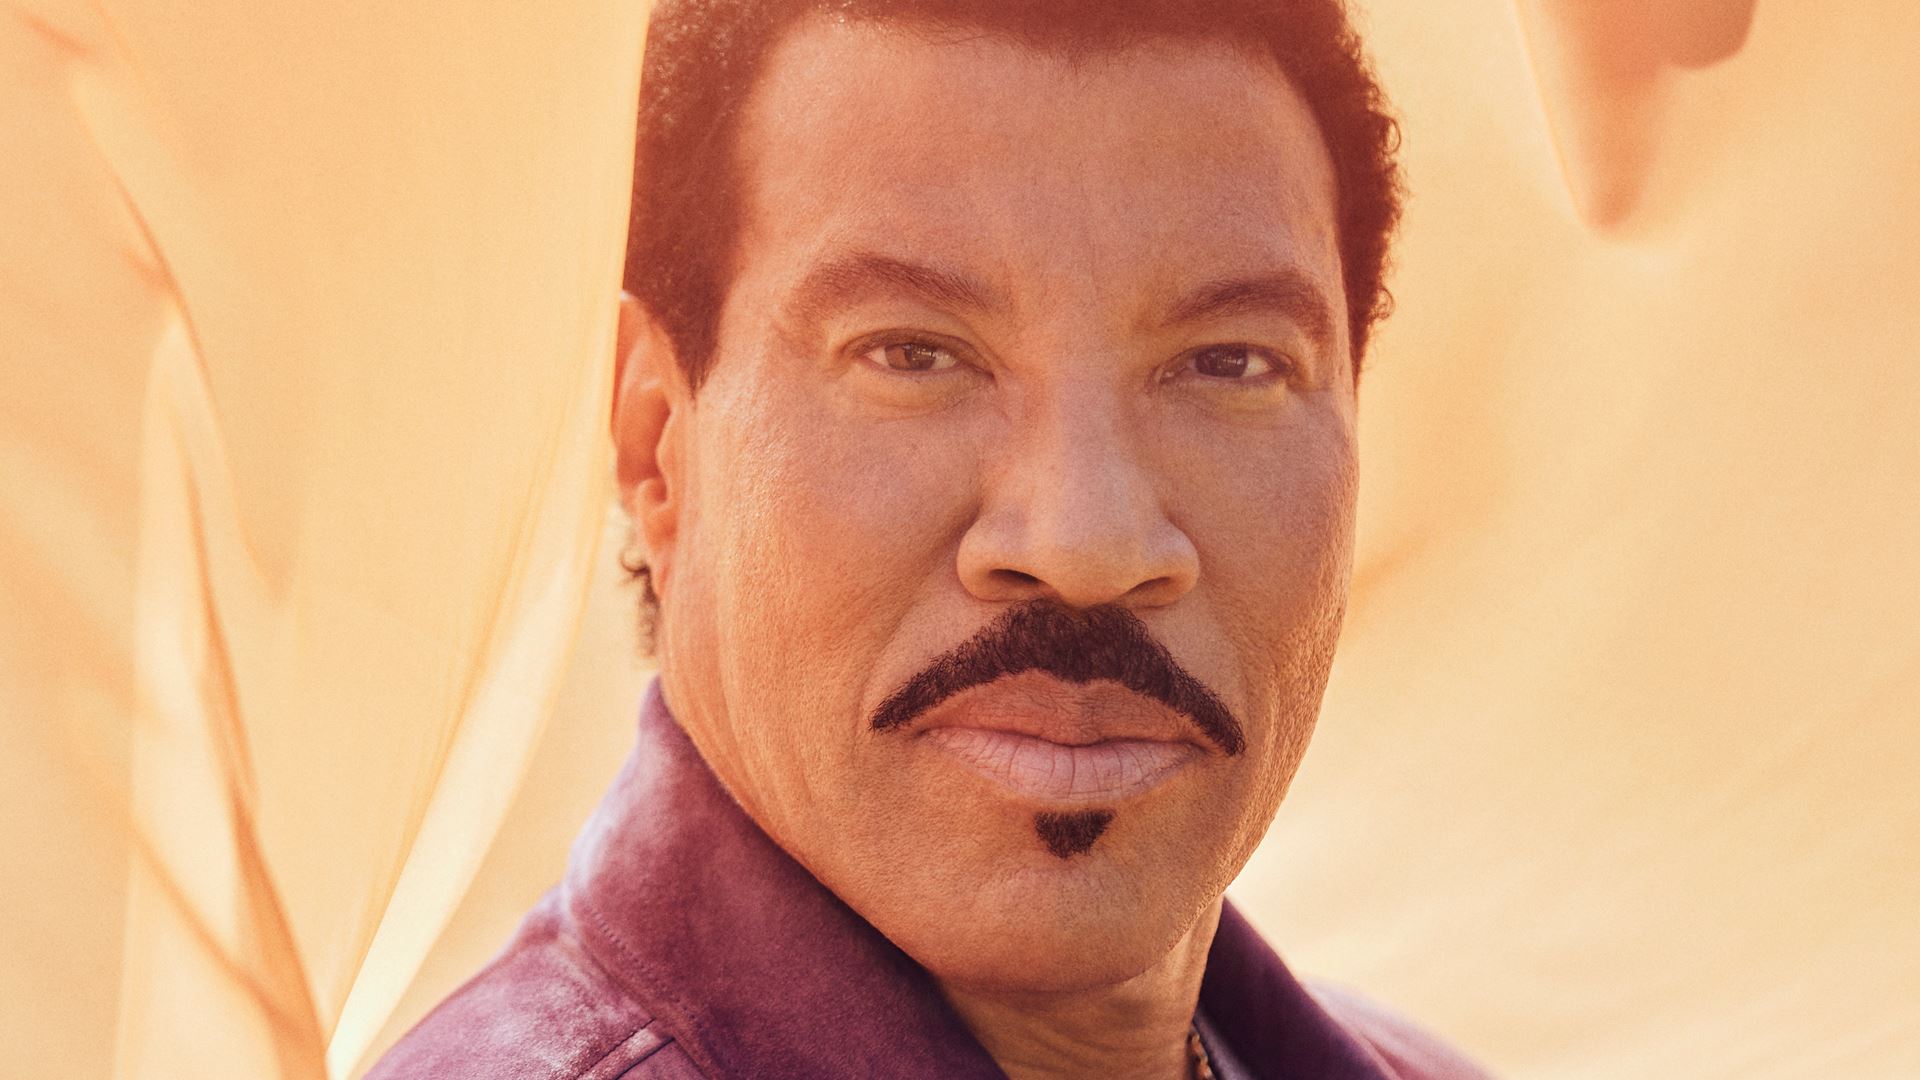 Lionel Richie to Receive the Library of Congress Gershwin Prize for Popular Song